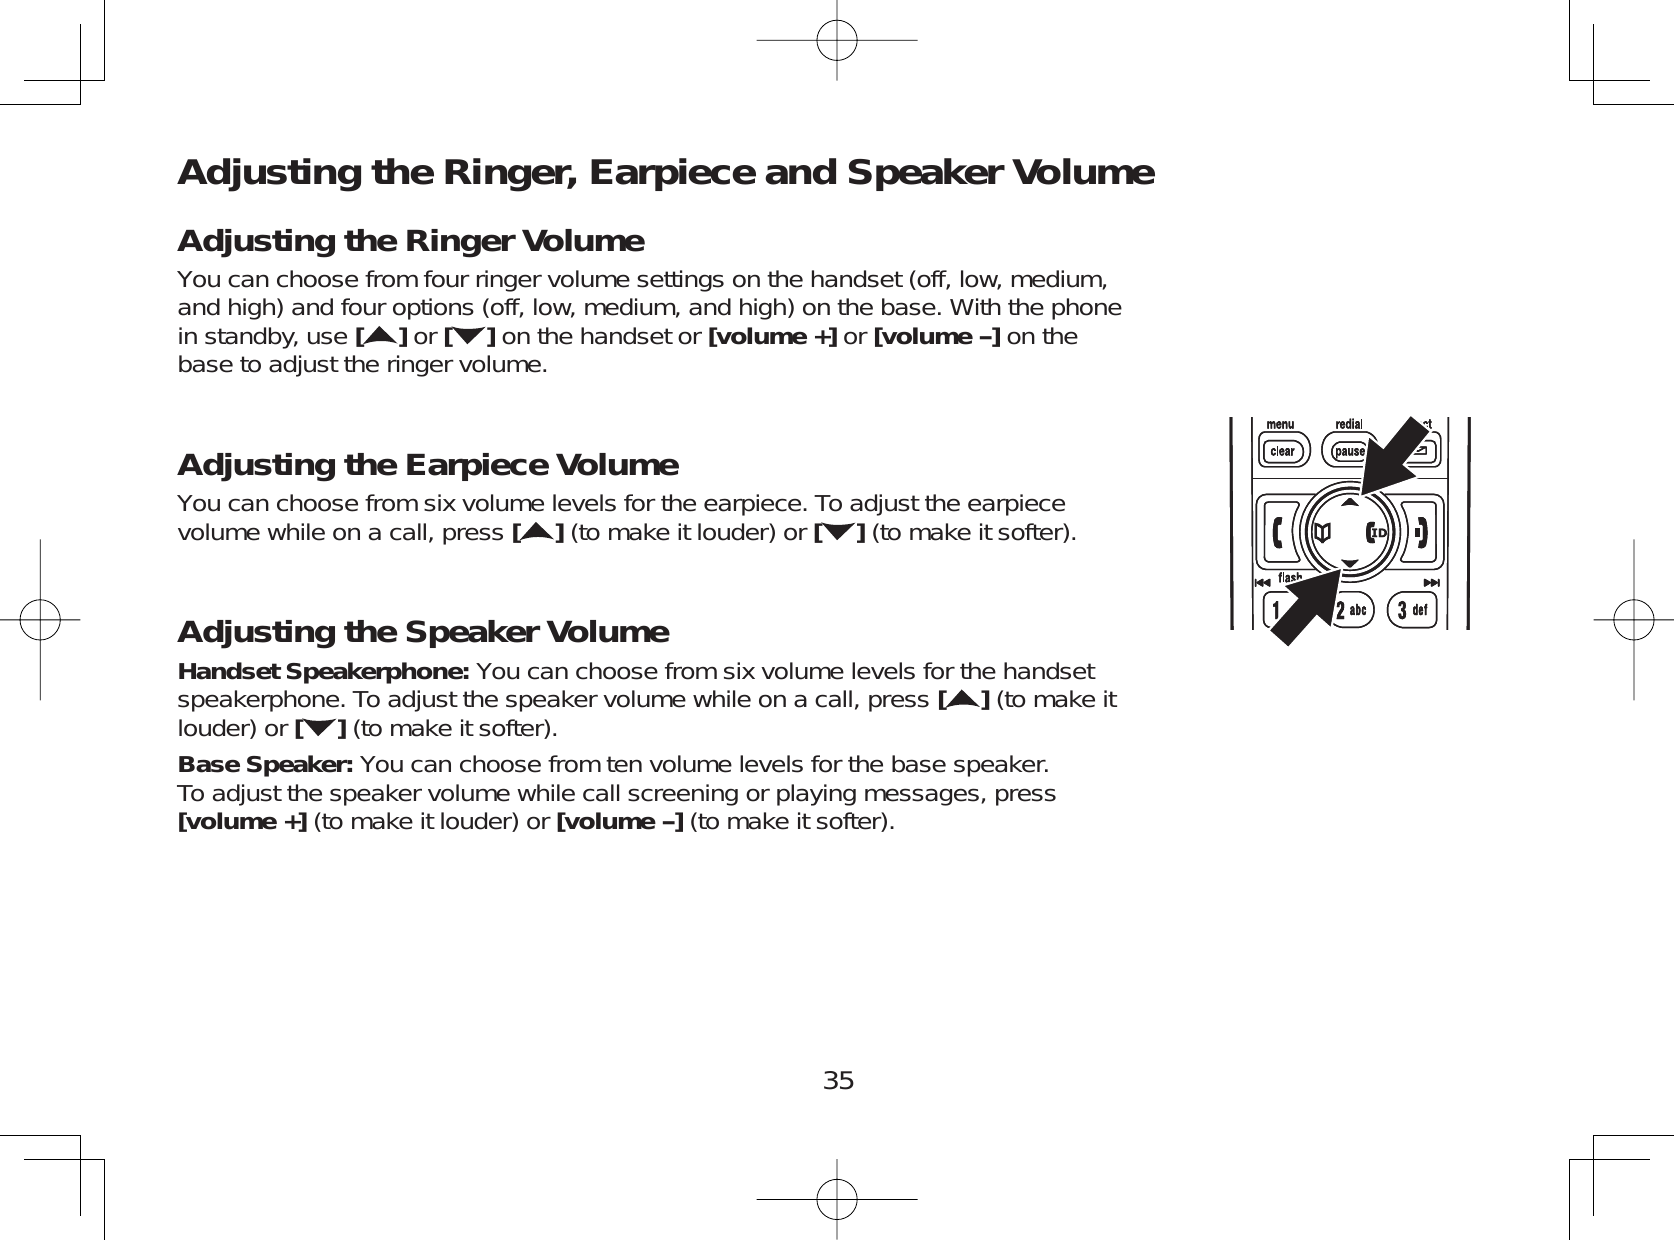 35Adjusting the Ringer, Earpiece and Speaker VolumeAdjusting the Ringer VolumeYou can choose from four ringer volume settings on the handset (off, low, medium,and high) and four options (off, low, medium, and high) on the base. With the phonein standby, use []or [ ] on the handset or [volume +] or [volume-]on thebase to adjust the ringer volume.Adjusting the Earpiece VolumeYou can choose from six volume levels for the earpiece. To adjust the earpiecevolume while on a call, press [](to make it louder) or [ ] (to make it softer).Adjusting the Speaker VolumeHandset Speakerphone: You can choose from six volume levels for the handsetspeakerphone. To adjust the speaker volume while on a call, press [](to make itlouder) or [](to make it softer).Base Speaker: You can choose from ten volume levels for the base speaker.To adjust the speaker volume while call screening or playing messages, press[volume +] (to make it louder) or [volume-](to make it softer).